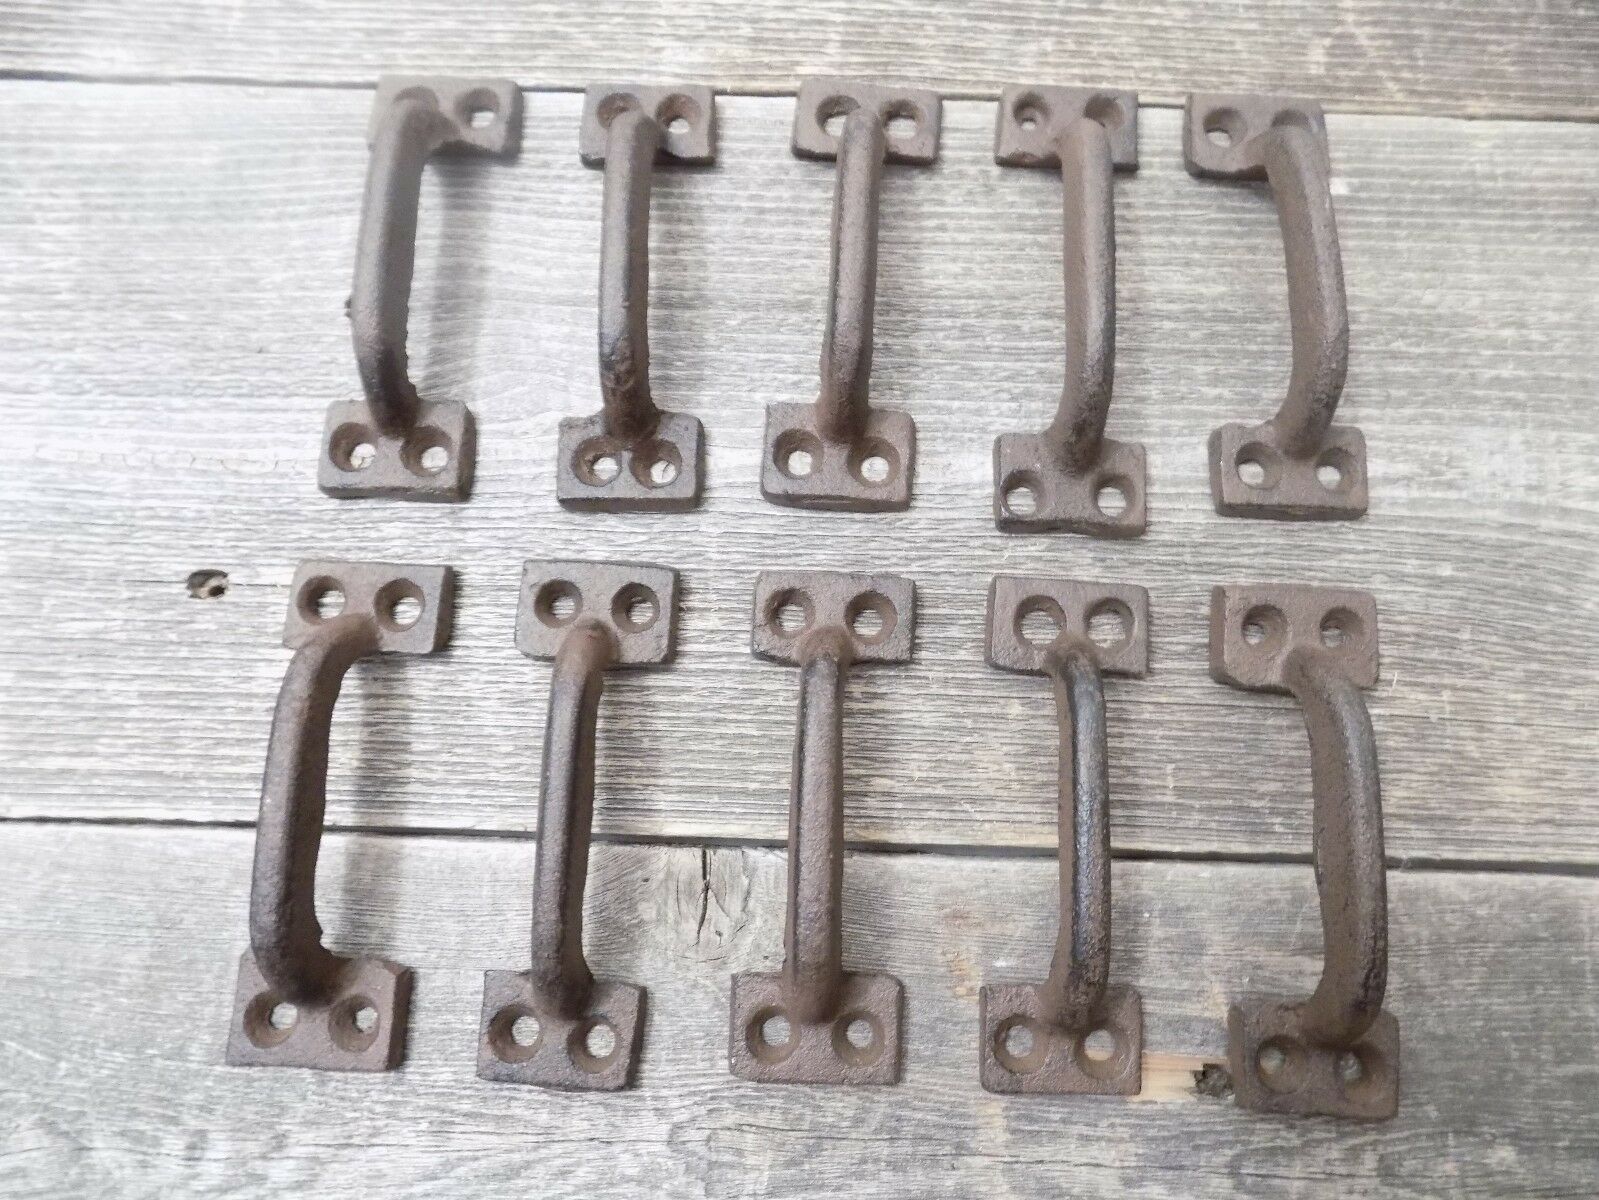 10 Cast Iron Handles Rustic Drawer Pulls Small 3 1/2" Long Home Decor Kitchen